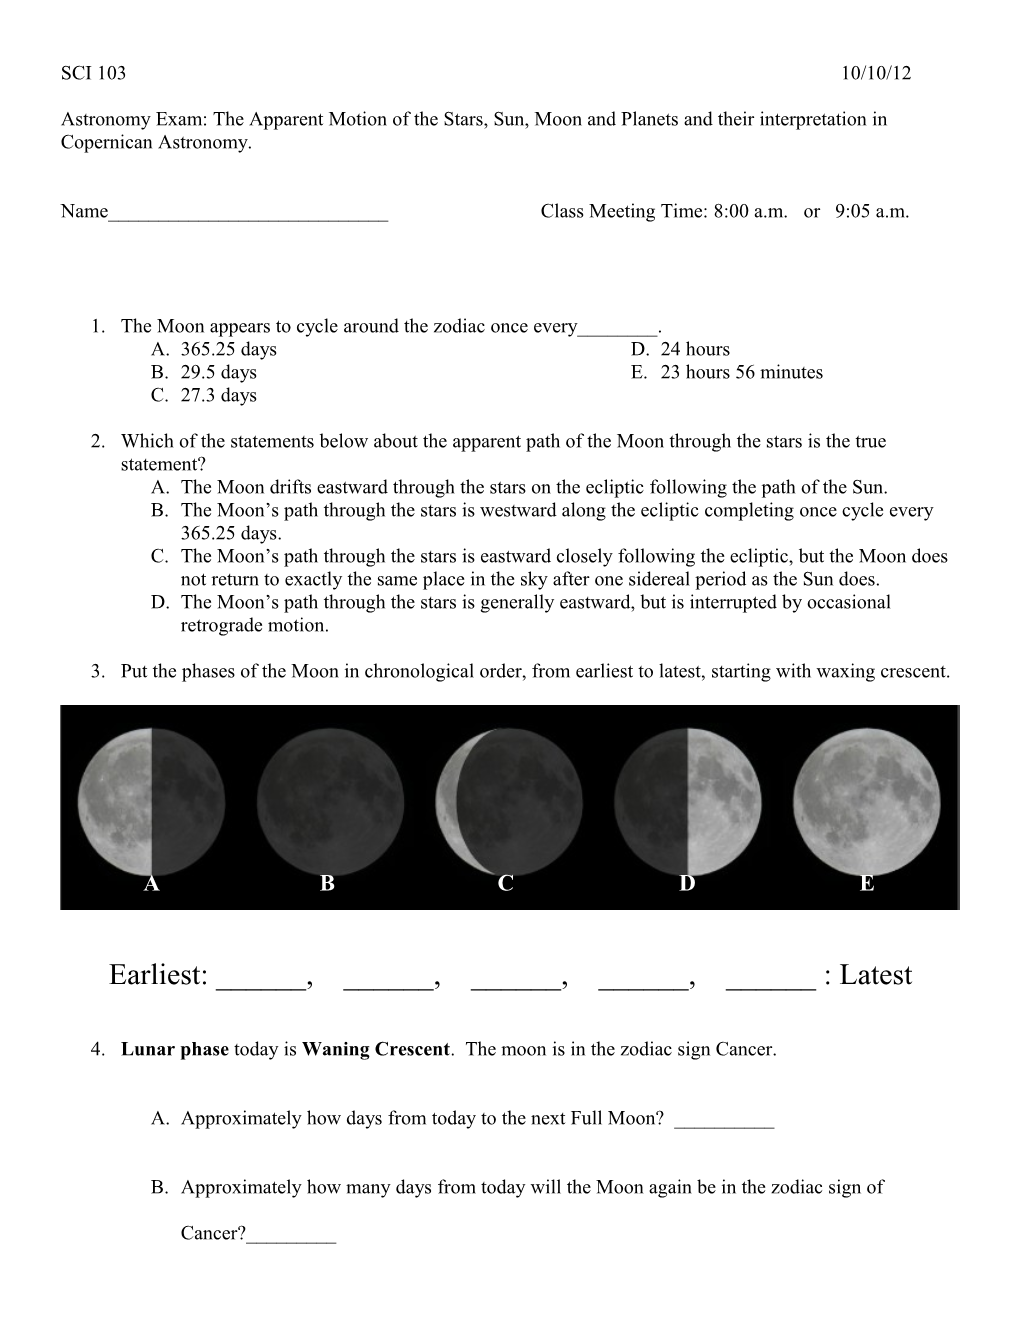 Astronomy Exam: the Apparent Motion of the Stars, Sun, Moon and Planets and Their Interpretation